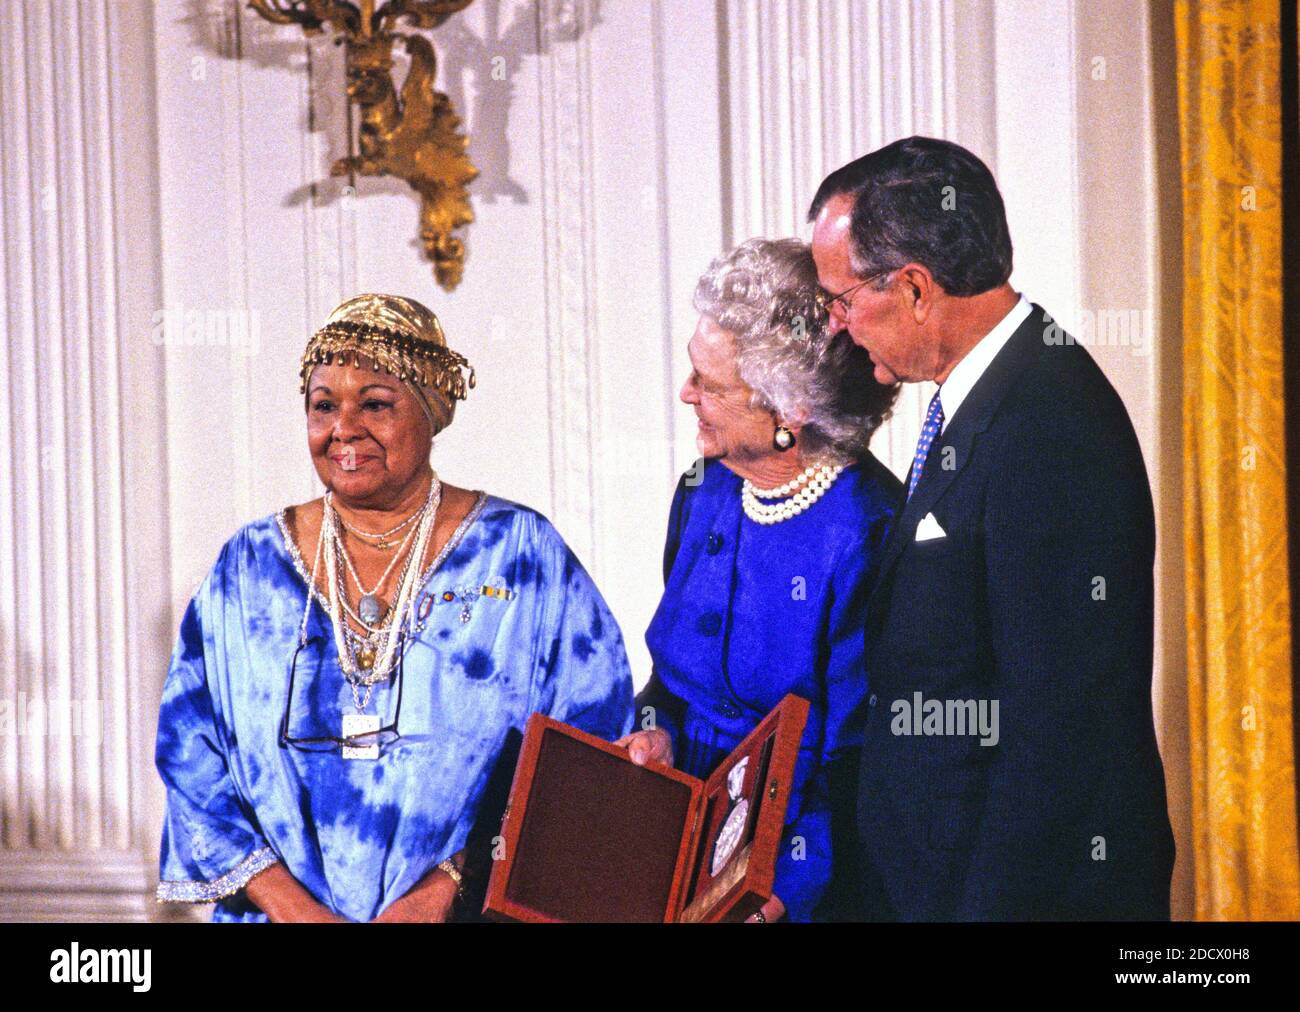 United States President George H.W. Bush and first lady Barbara Bush present the National Medal of Arts to American dancer and choreographer Katherine Dunham during a ceremony in the East Room of the White House in Washington, DC on November 19, 1989. Credit: Ron Sachs / CNP/ABACAPRESS.COM Stock Photo